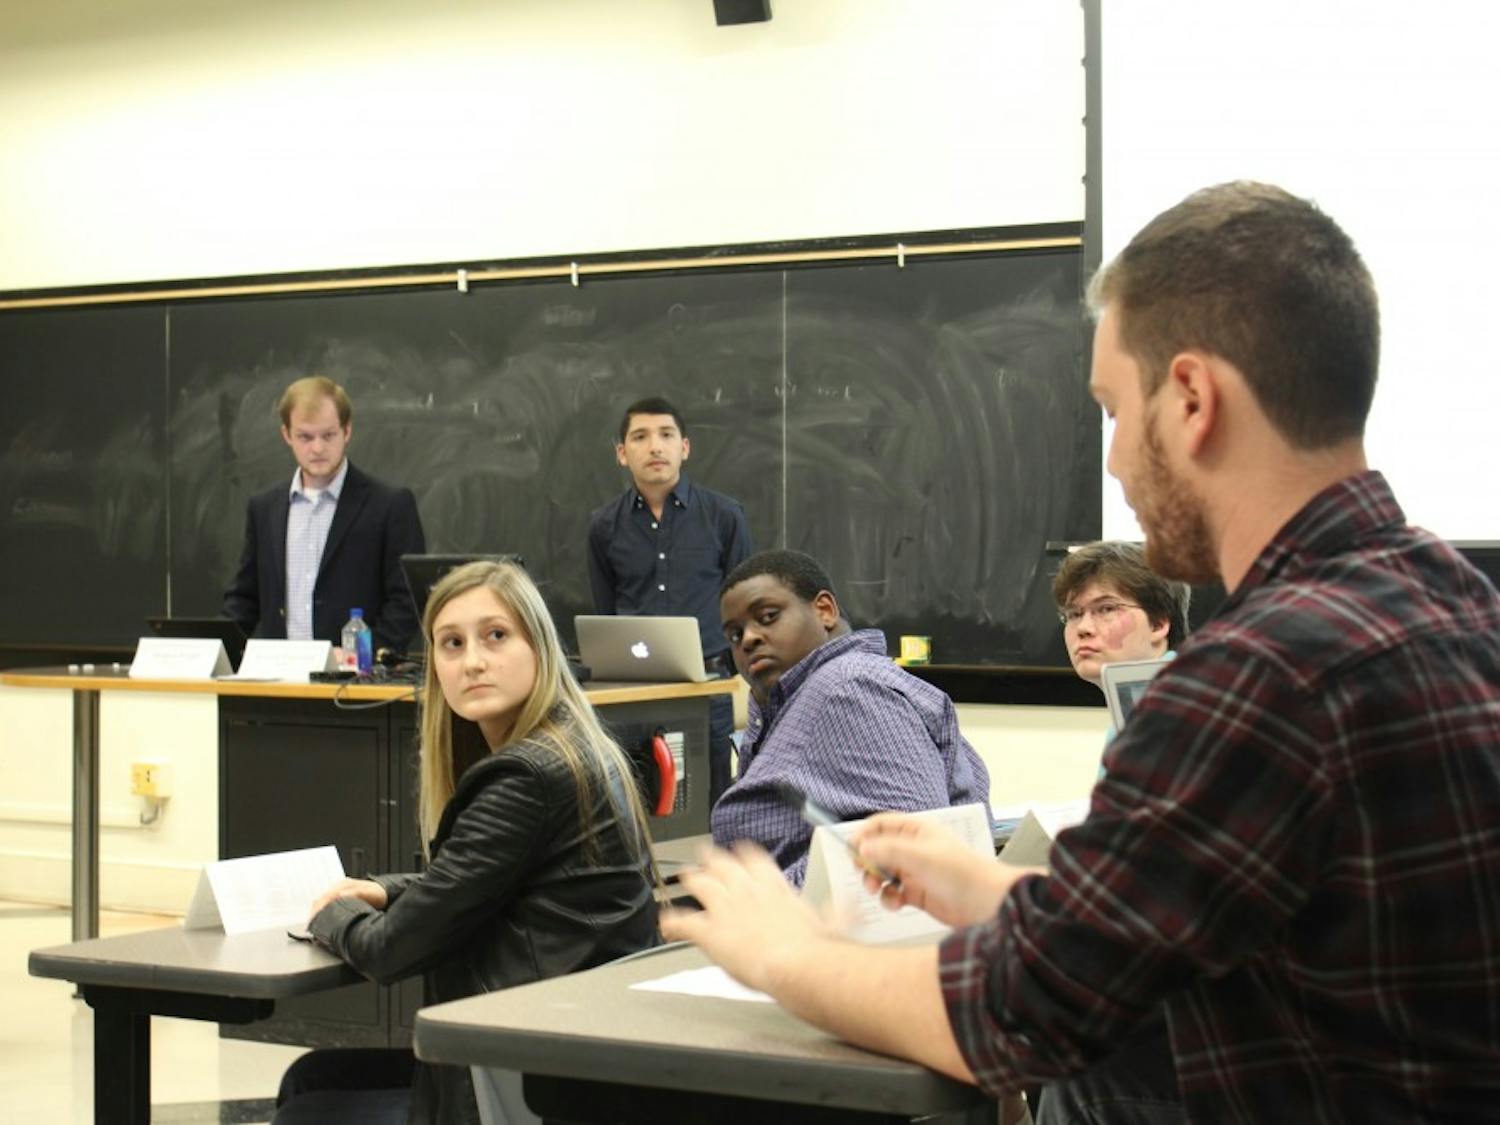 Senator Oliver Mitchell (far right) addresses the full Undergraduate Senate about the process that led to Senator Sosa Evbuomwan's failed nomination to the Student Advisory Committee to the Chancellor Tuesday, Oct. 16, 2018 in Gardner Hall.